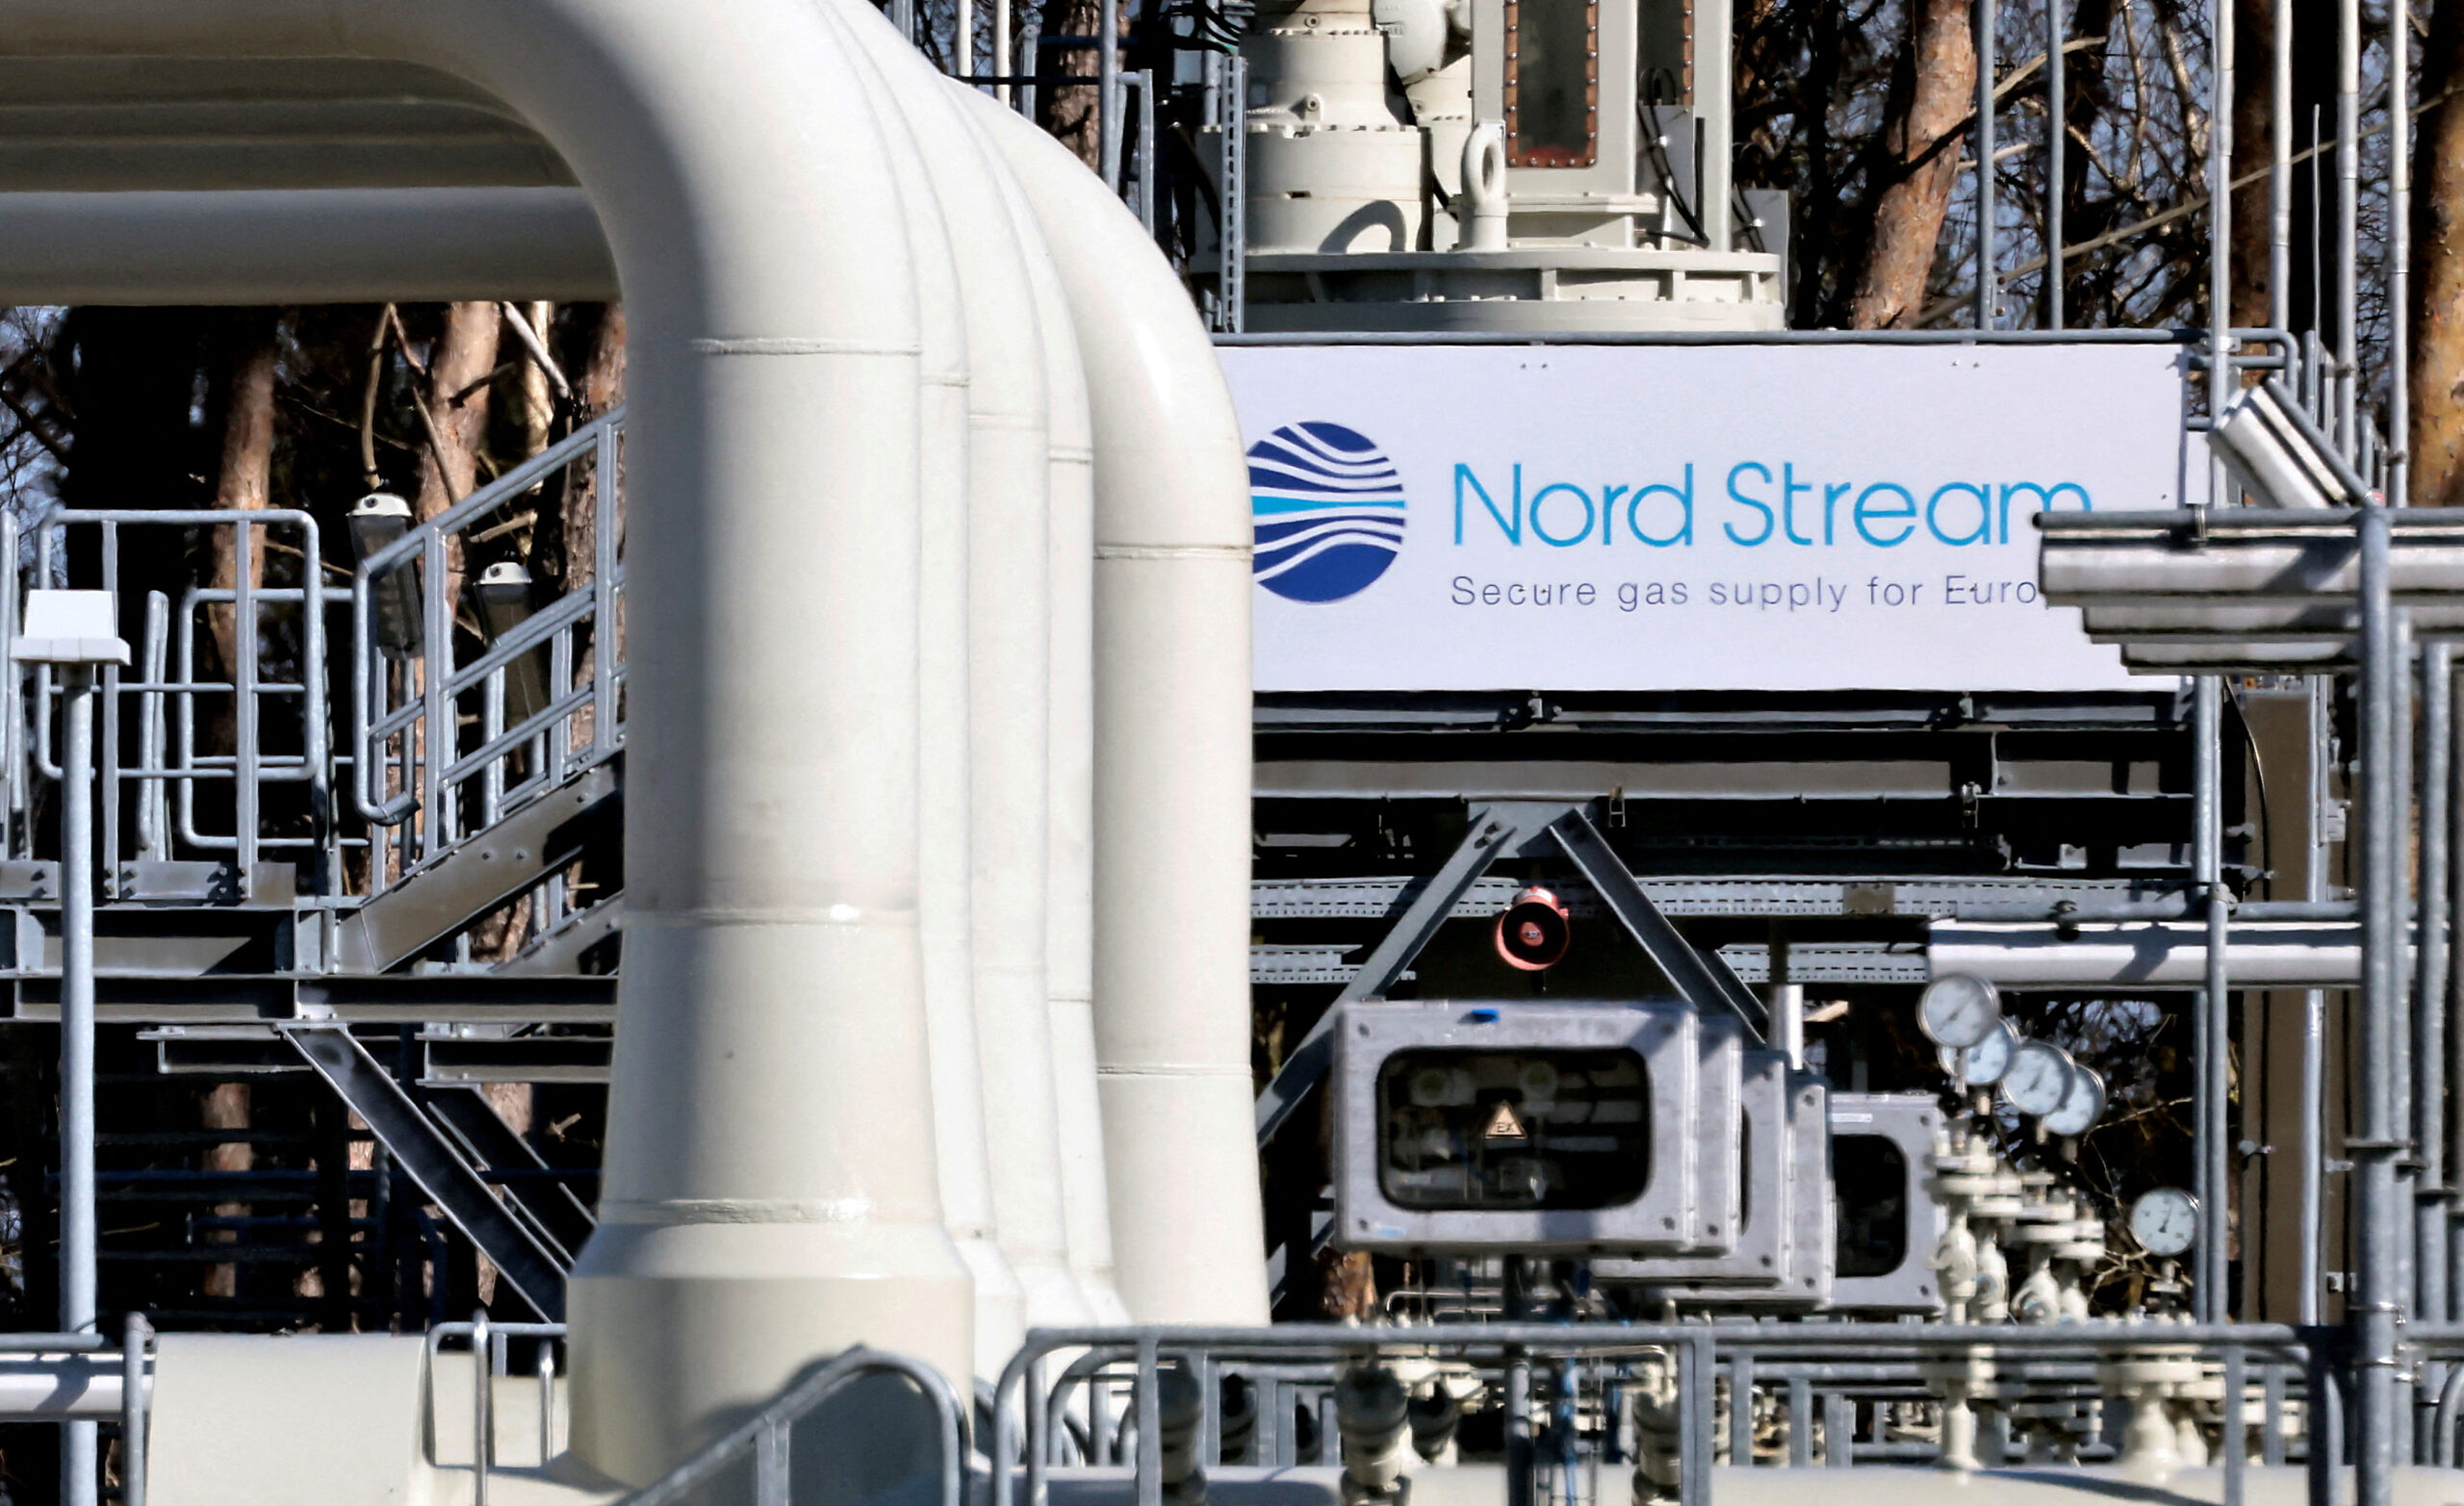 FACT: Nord Stream REPAIRS Were Happening Back in JULY, Well BEFORE The Explosions… Could Something Have Gone Wrong?